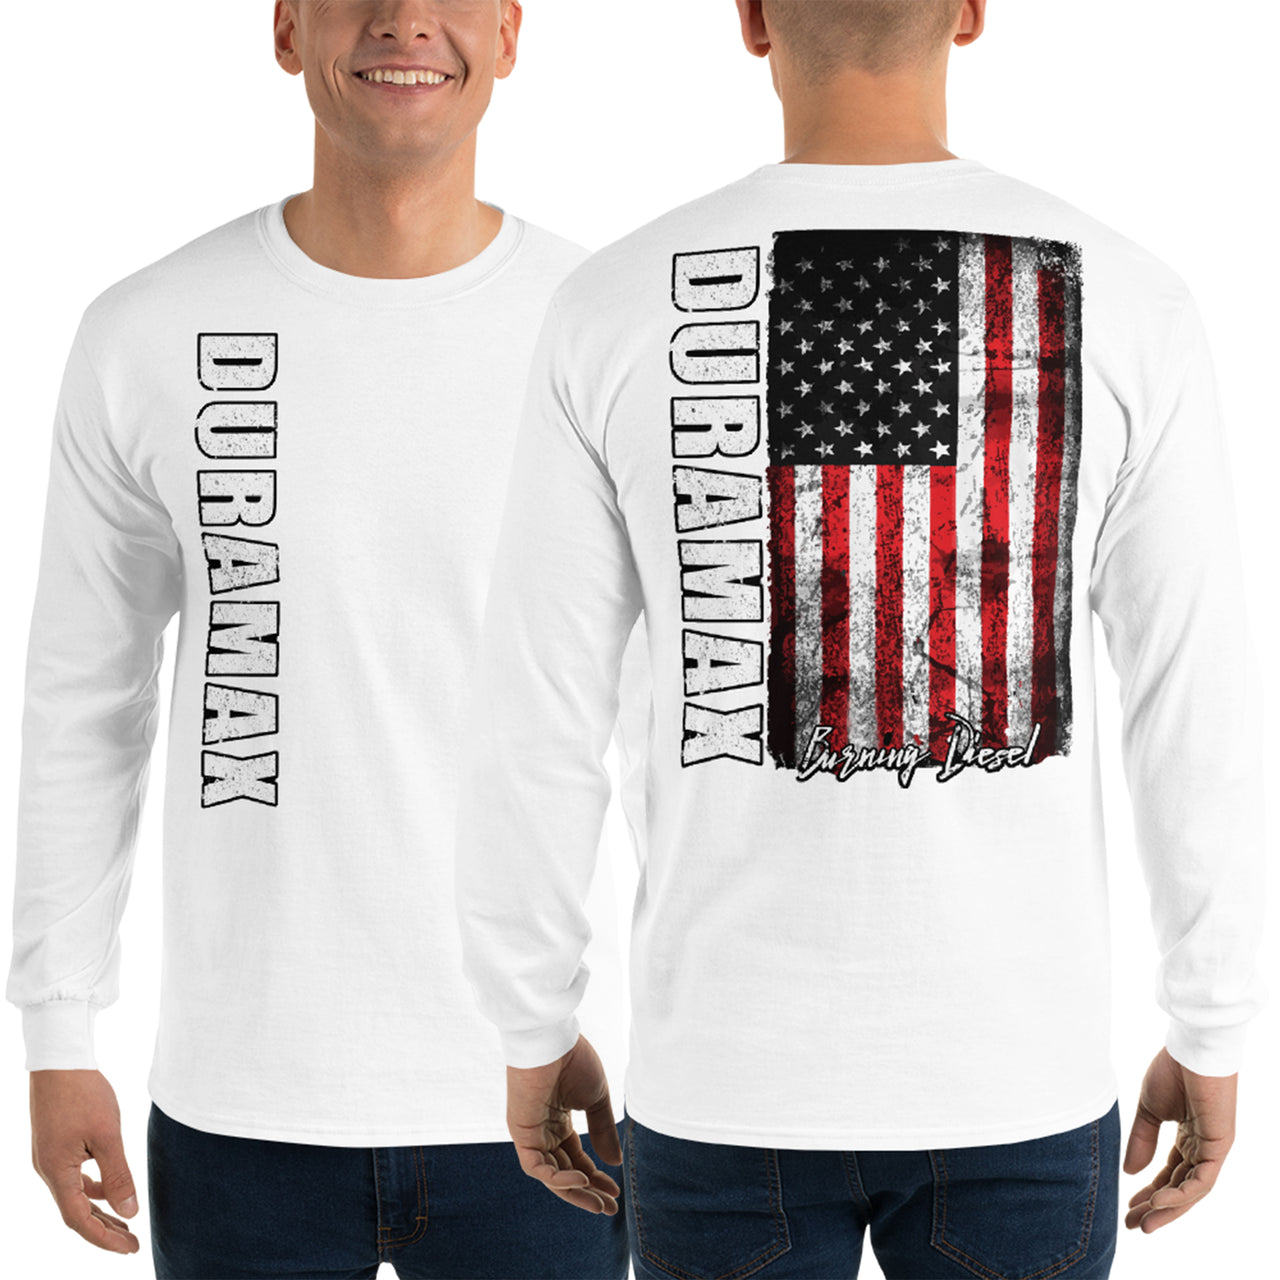 Duramax Shirt With American Flag Design Mens Long Sleeve T-Shirt modeled in white